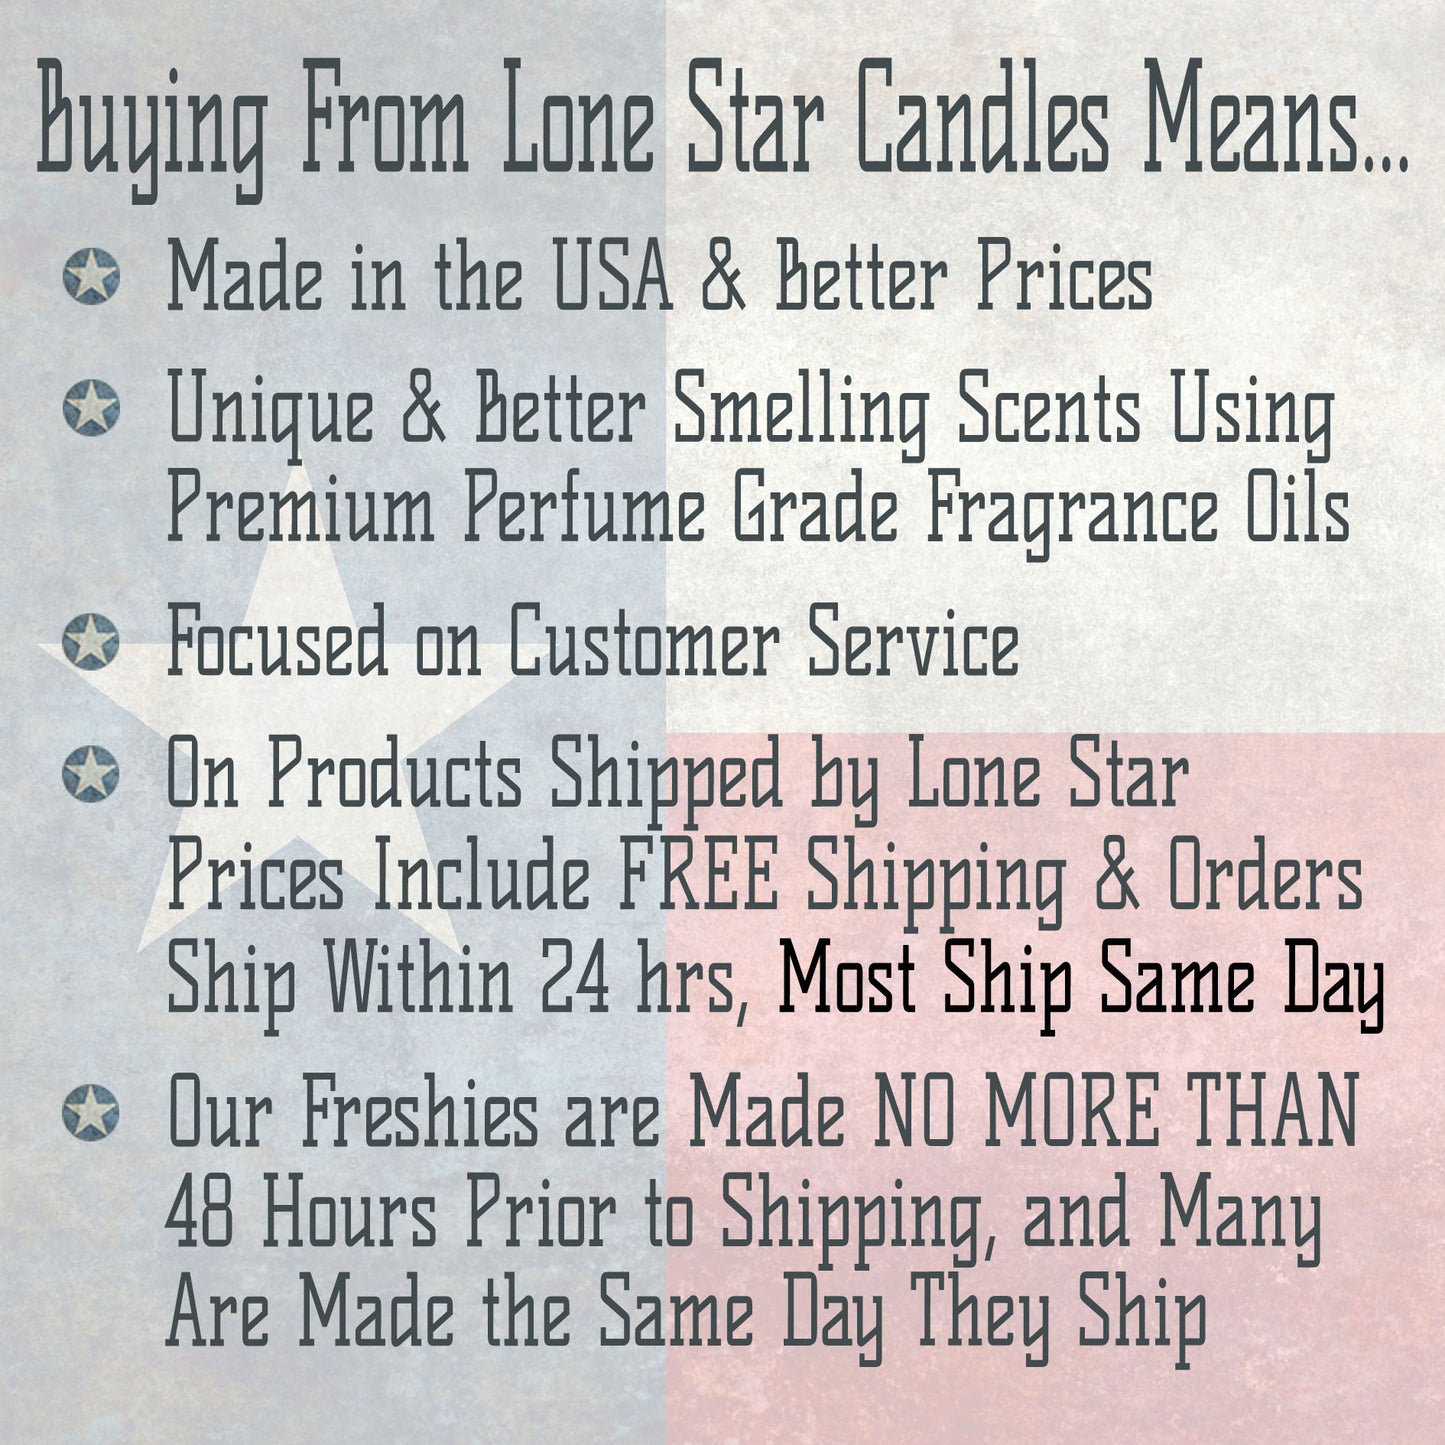 Cranberries & Sandalwood, Lone Star Candles & More's Premium Strong Scented Freshies, A Delightful Mix of Spiced Cranberry, & Sandalwood, Car & Air Freshener, USA Made in TX, Brown Horse Head 1-Pack